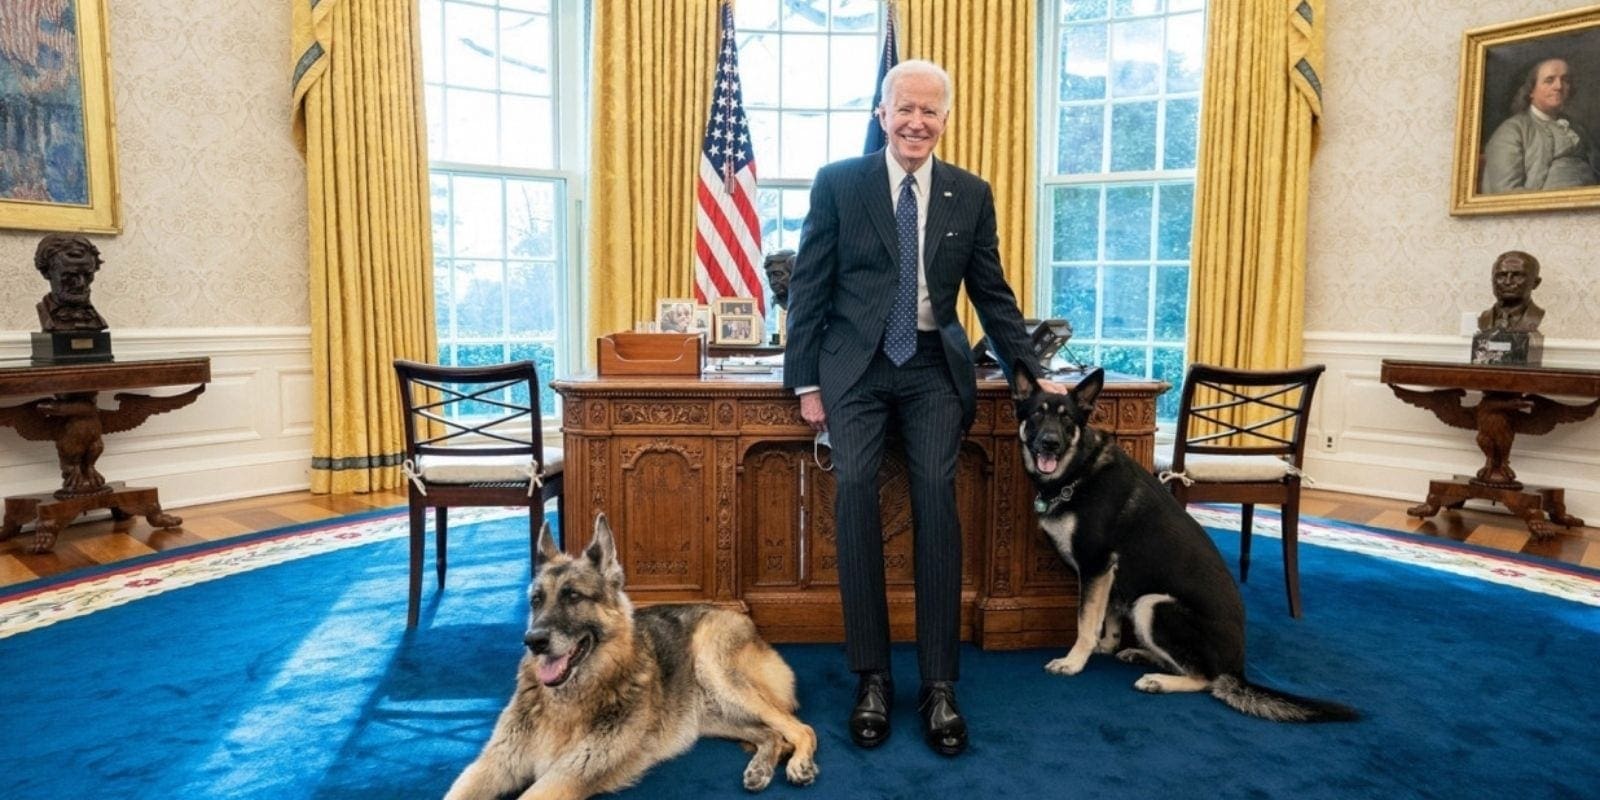 Dogs in Oval